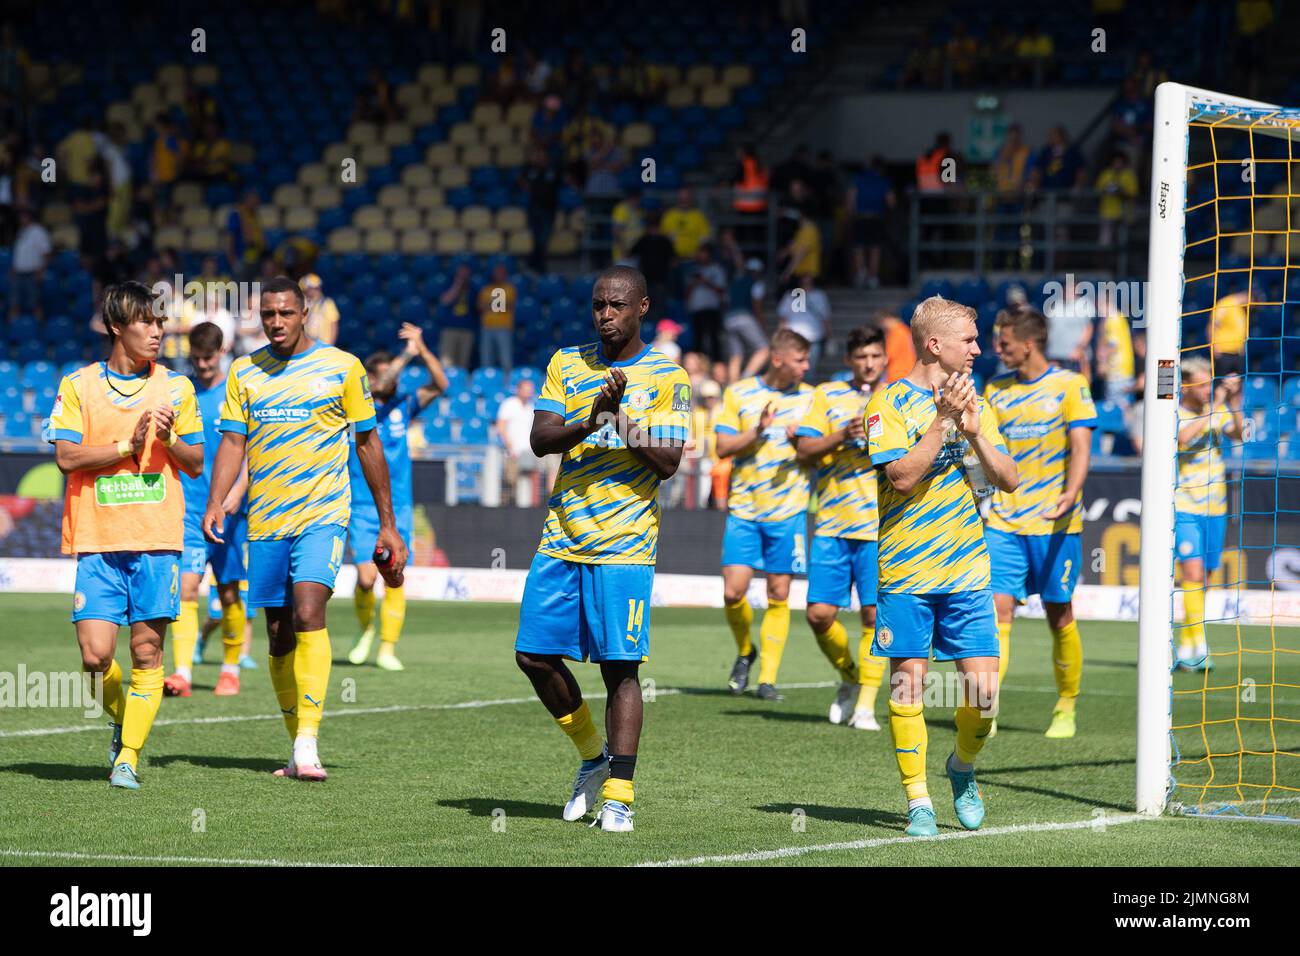 07 August 2022, Lower Saxony, Brunswick: Soccer: 2nd Bundesliga, Eintracht Braunschweig - Darmstadt 98, Matchday 3, Eintracht Stadium. Braunschweig's players walk off the field after the game. Photo: Swen Pförtner/dpa - IMPORTANT NOTE: In accordance with the requirements of the DFL Deutsche Fußball Liga and the DFB Deutscher Fußball-Bund, it is prohibited to use or have used photographs taken in the stadium and/or of the match in the form of sequence pictures and/or video-like photo series. Stock Photo